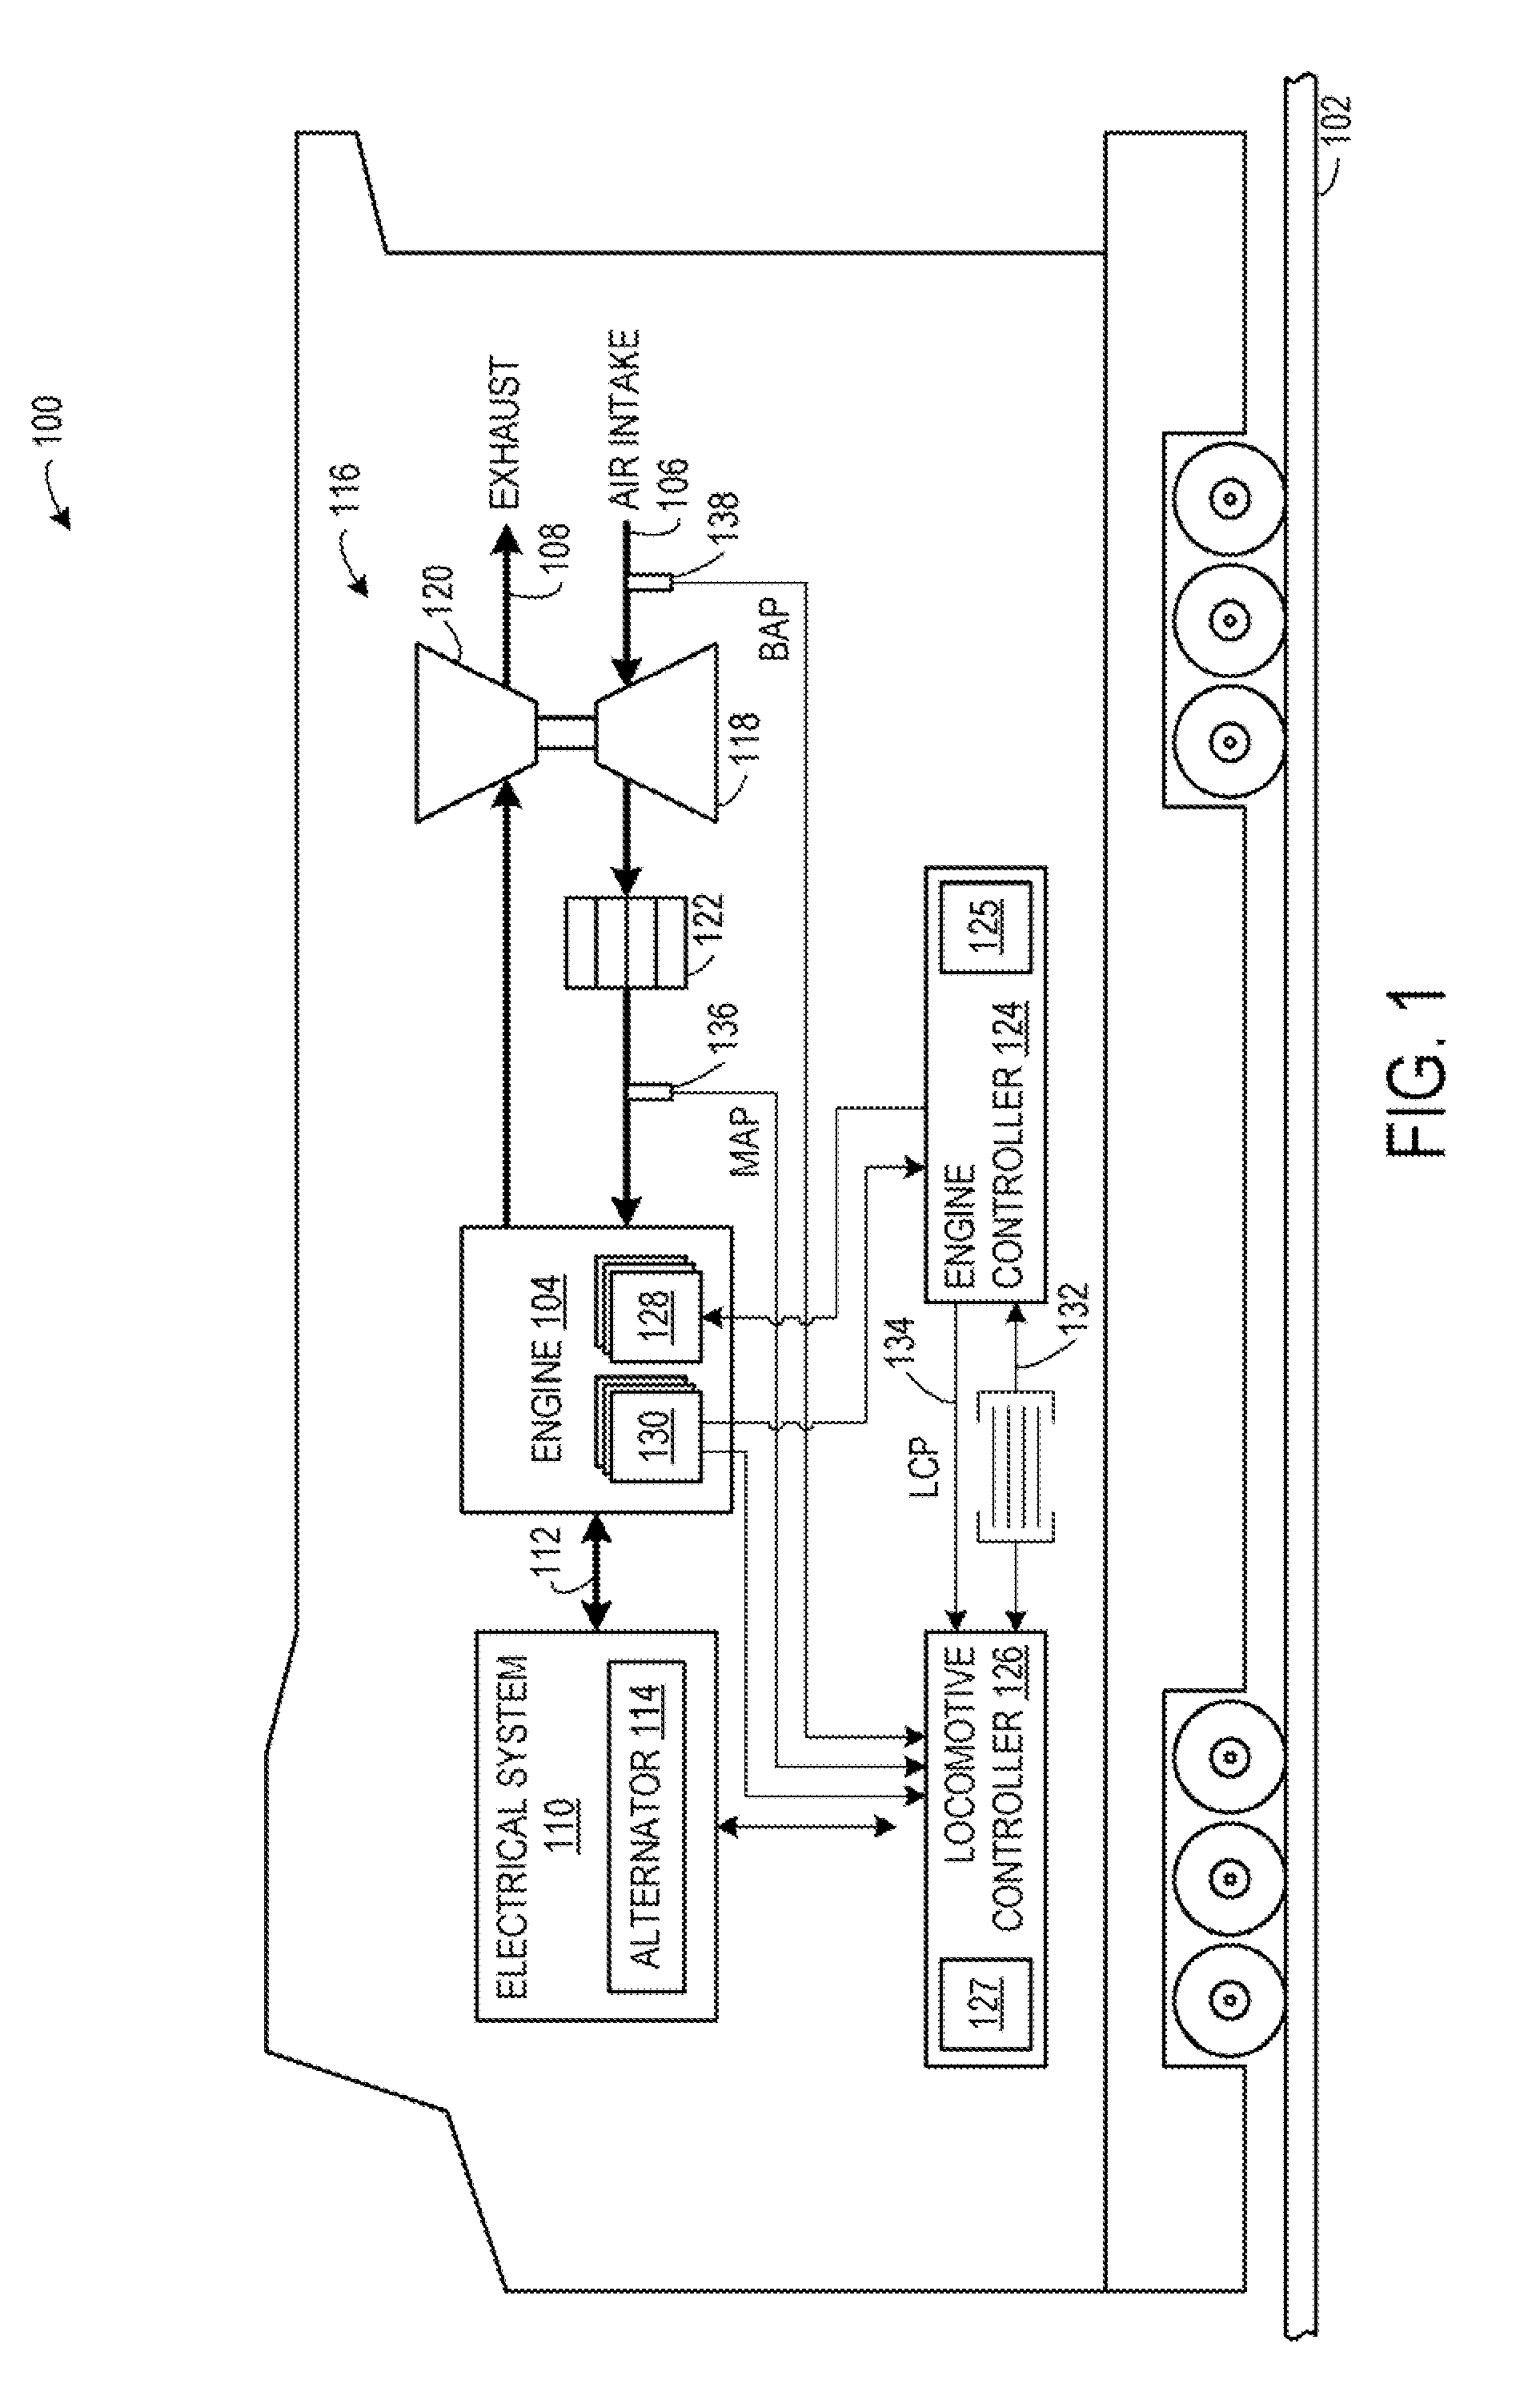 System and method for determining compression device degradation